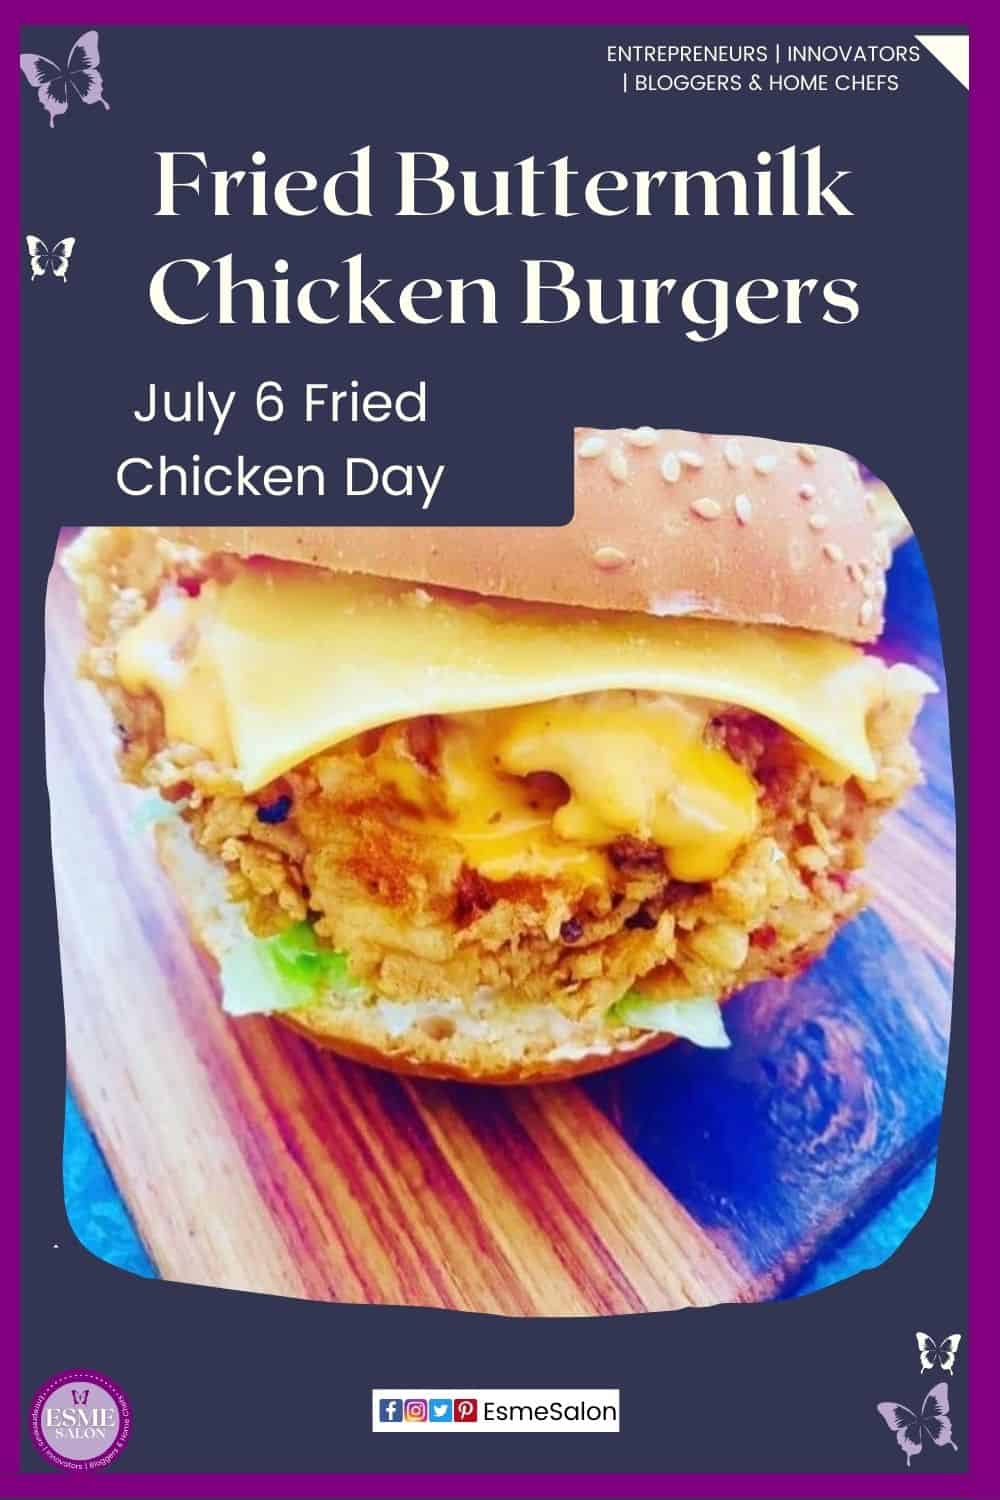 an image of a chicken burger with a fried chicken patty and cheese